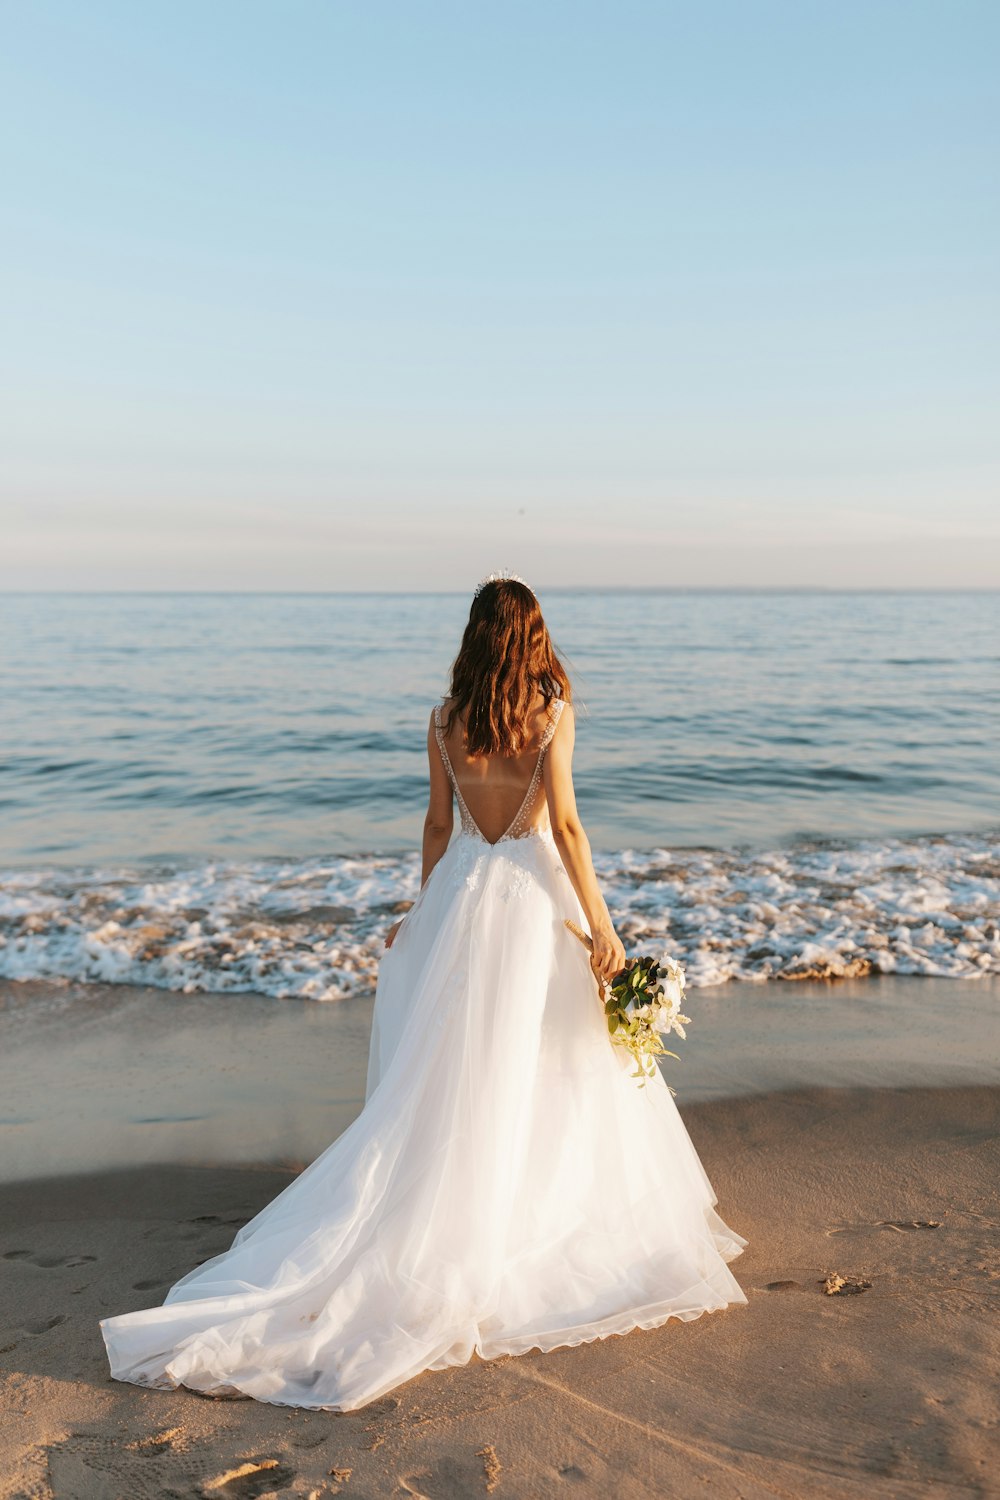 100+ Wedding Dress Pictures | Download Free Images & Stock Photos on  Unsplash